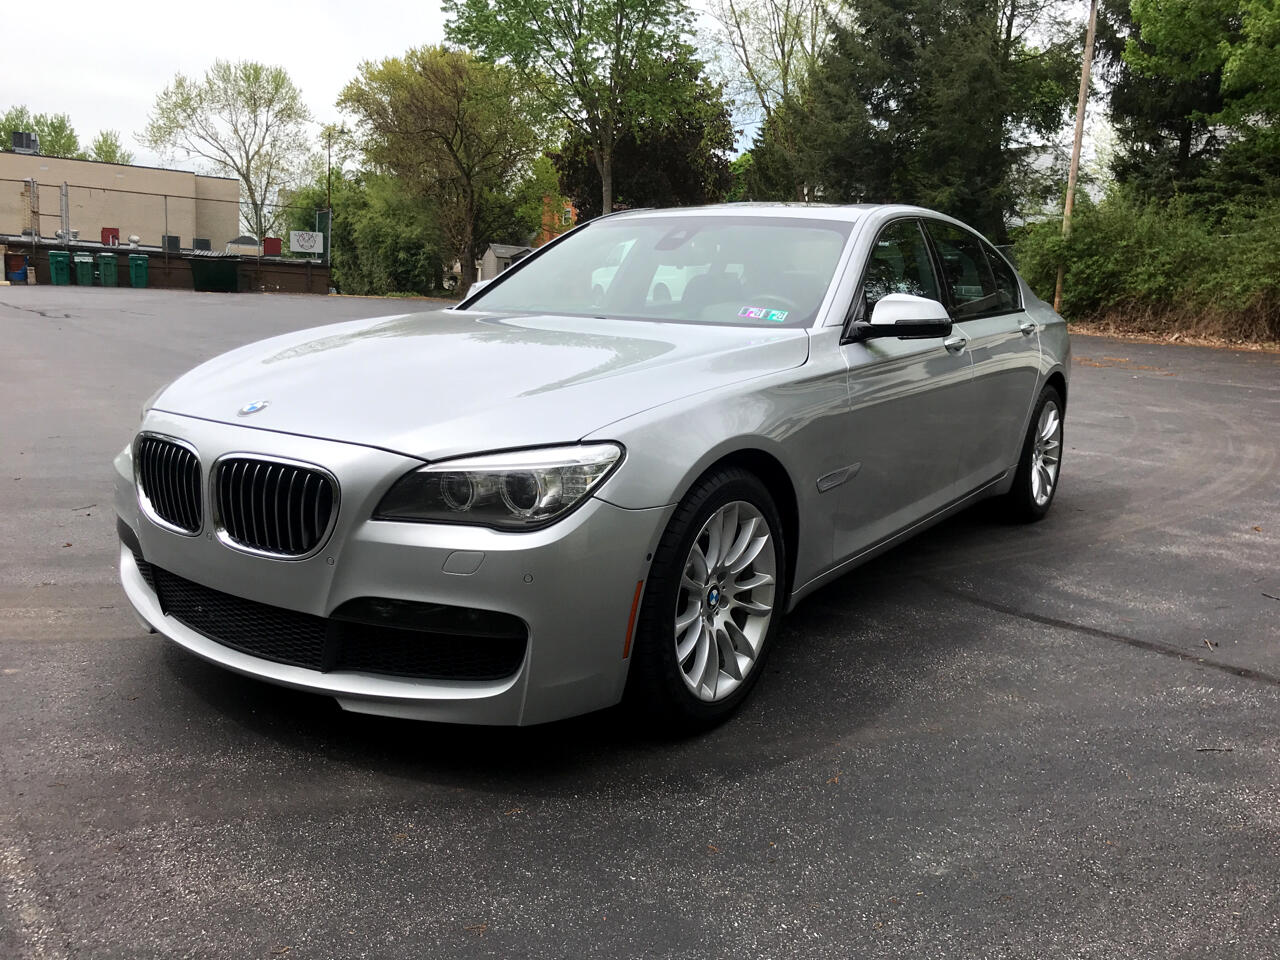 Used 2013 BMW 750i xDrive M-Sport for Sale in Pittsburgh PA 15202 ...